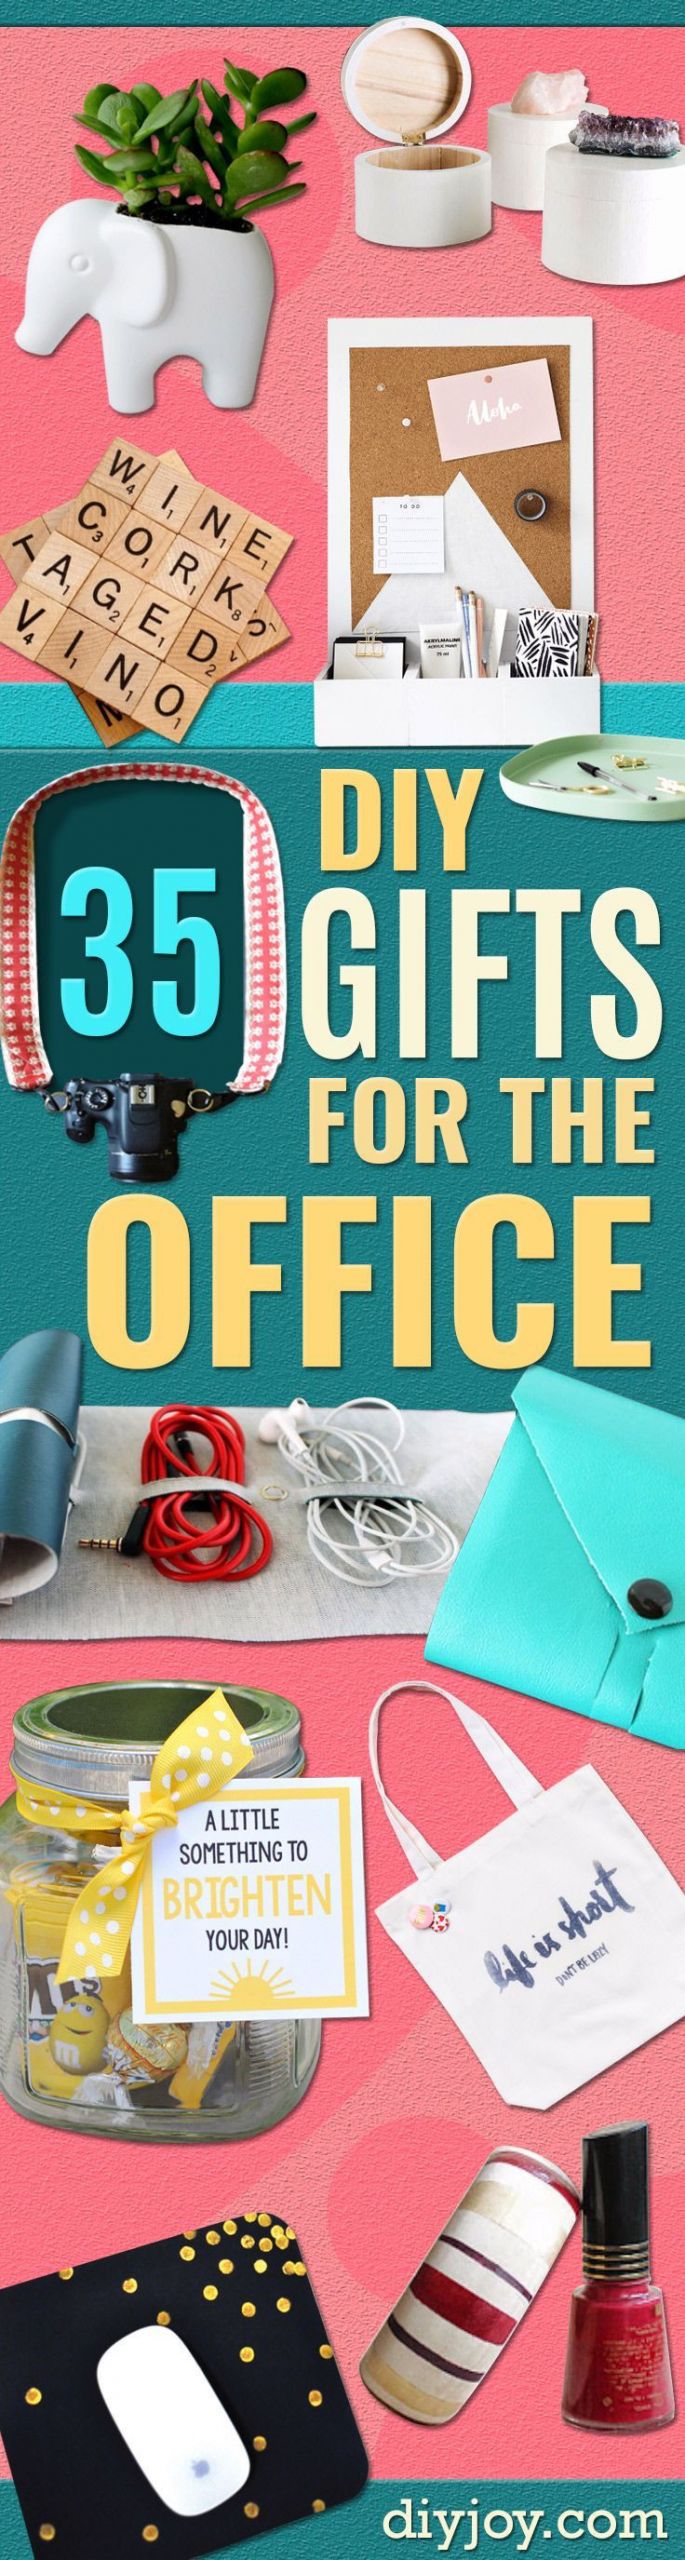 Gift Basket Ideas For Office Staff
 25 unique fice parties ideas on Pinterest